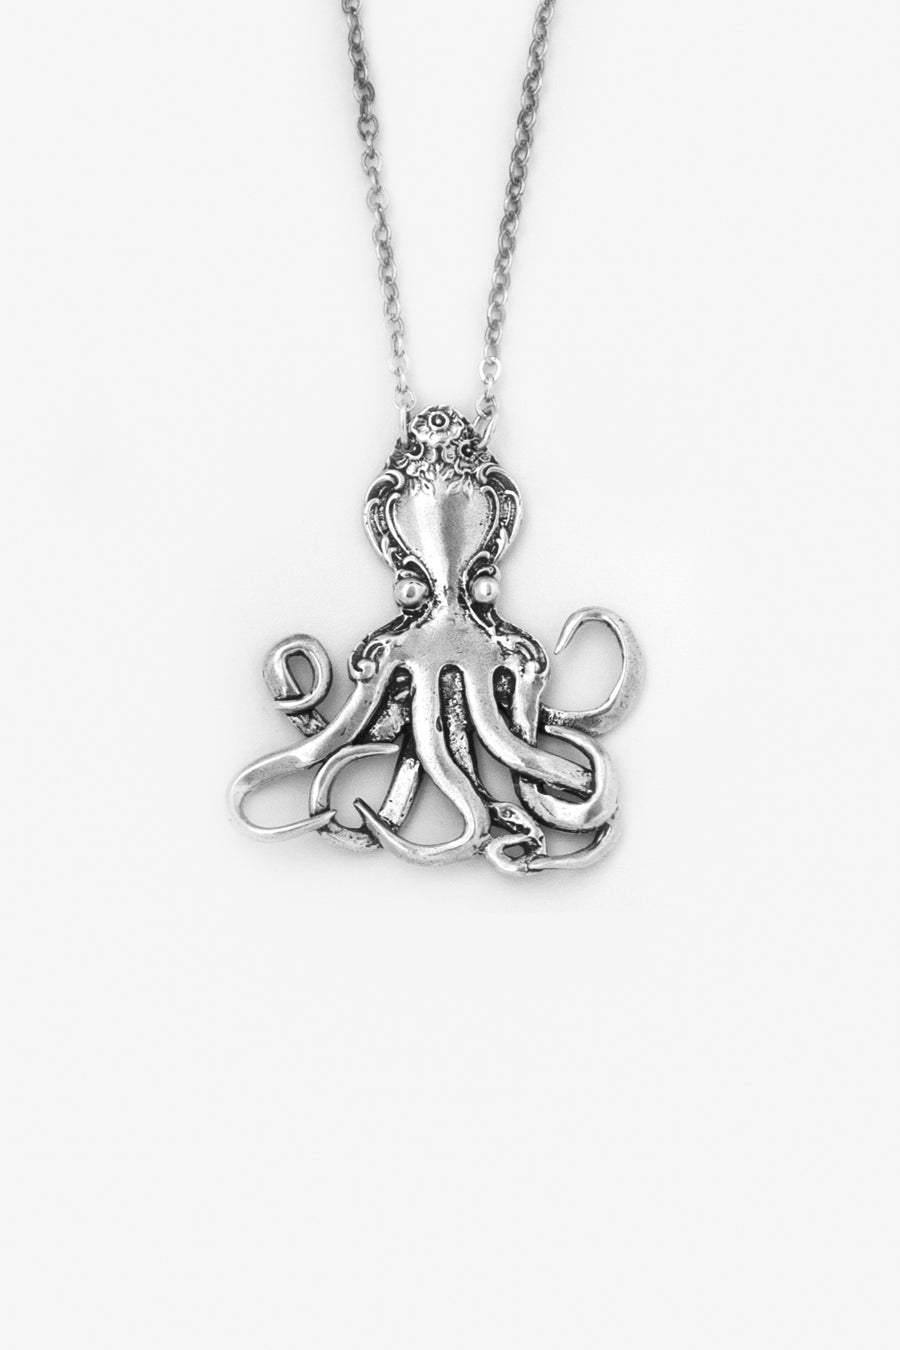 Octopus Sterling Silver Necklace - Silver Spoon Jewelry